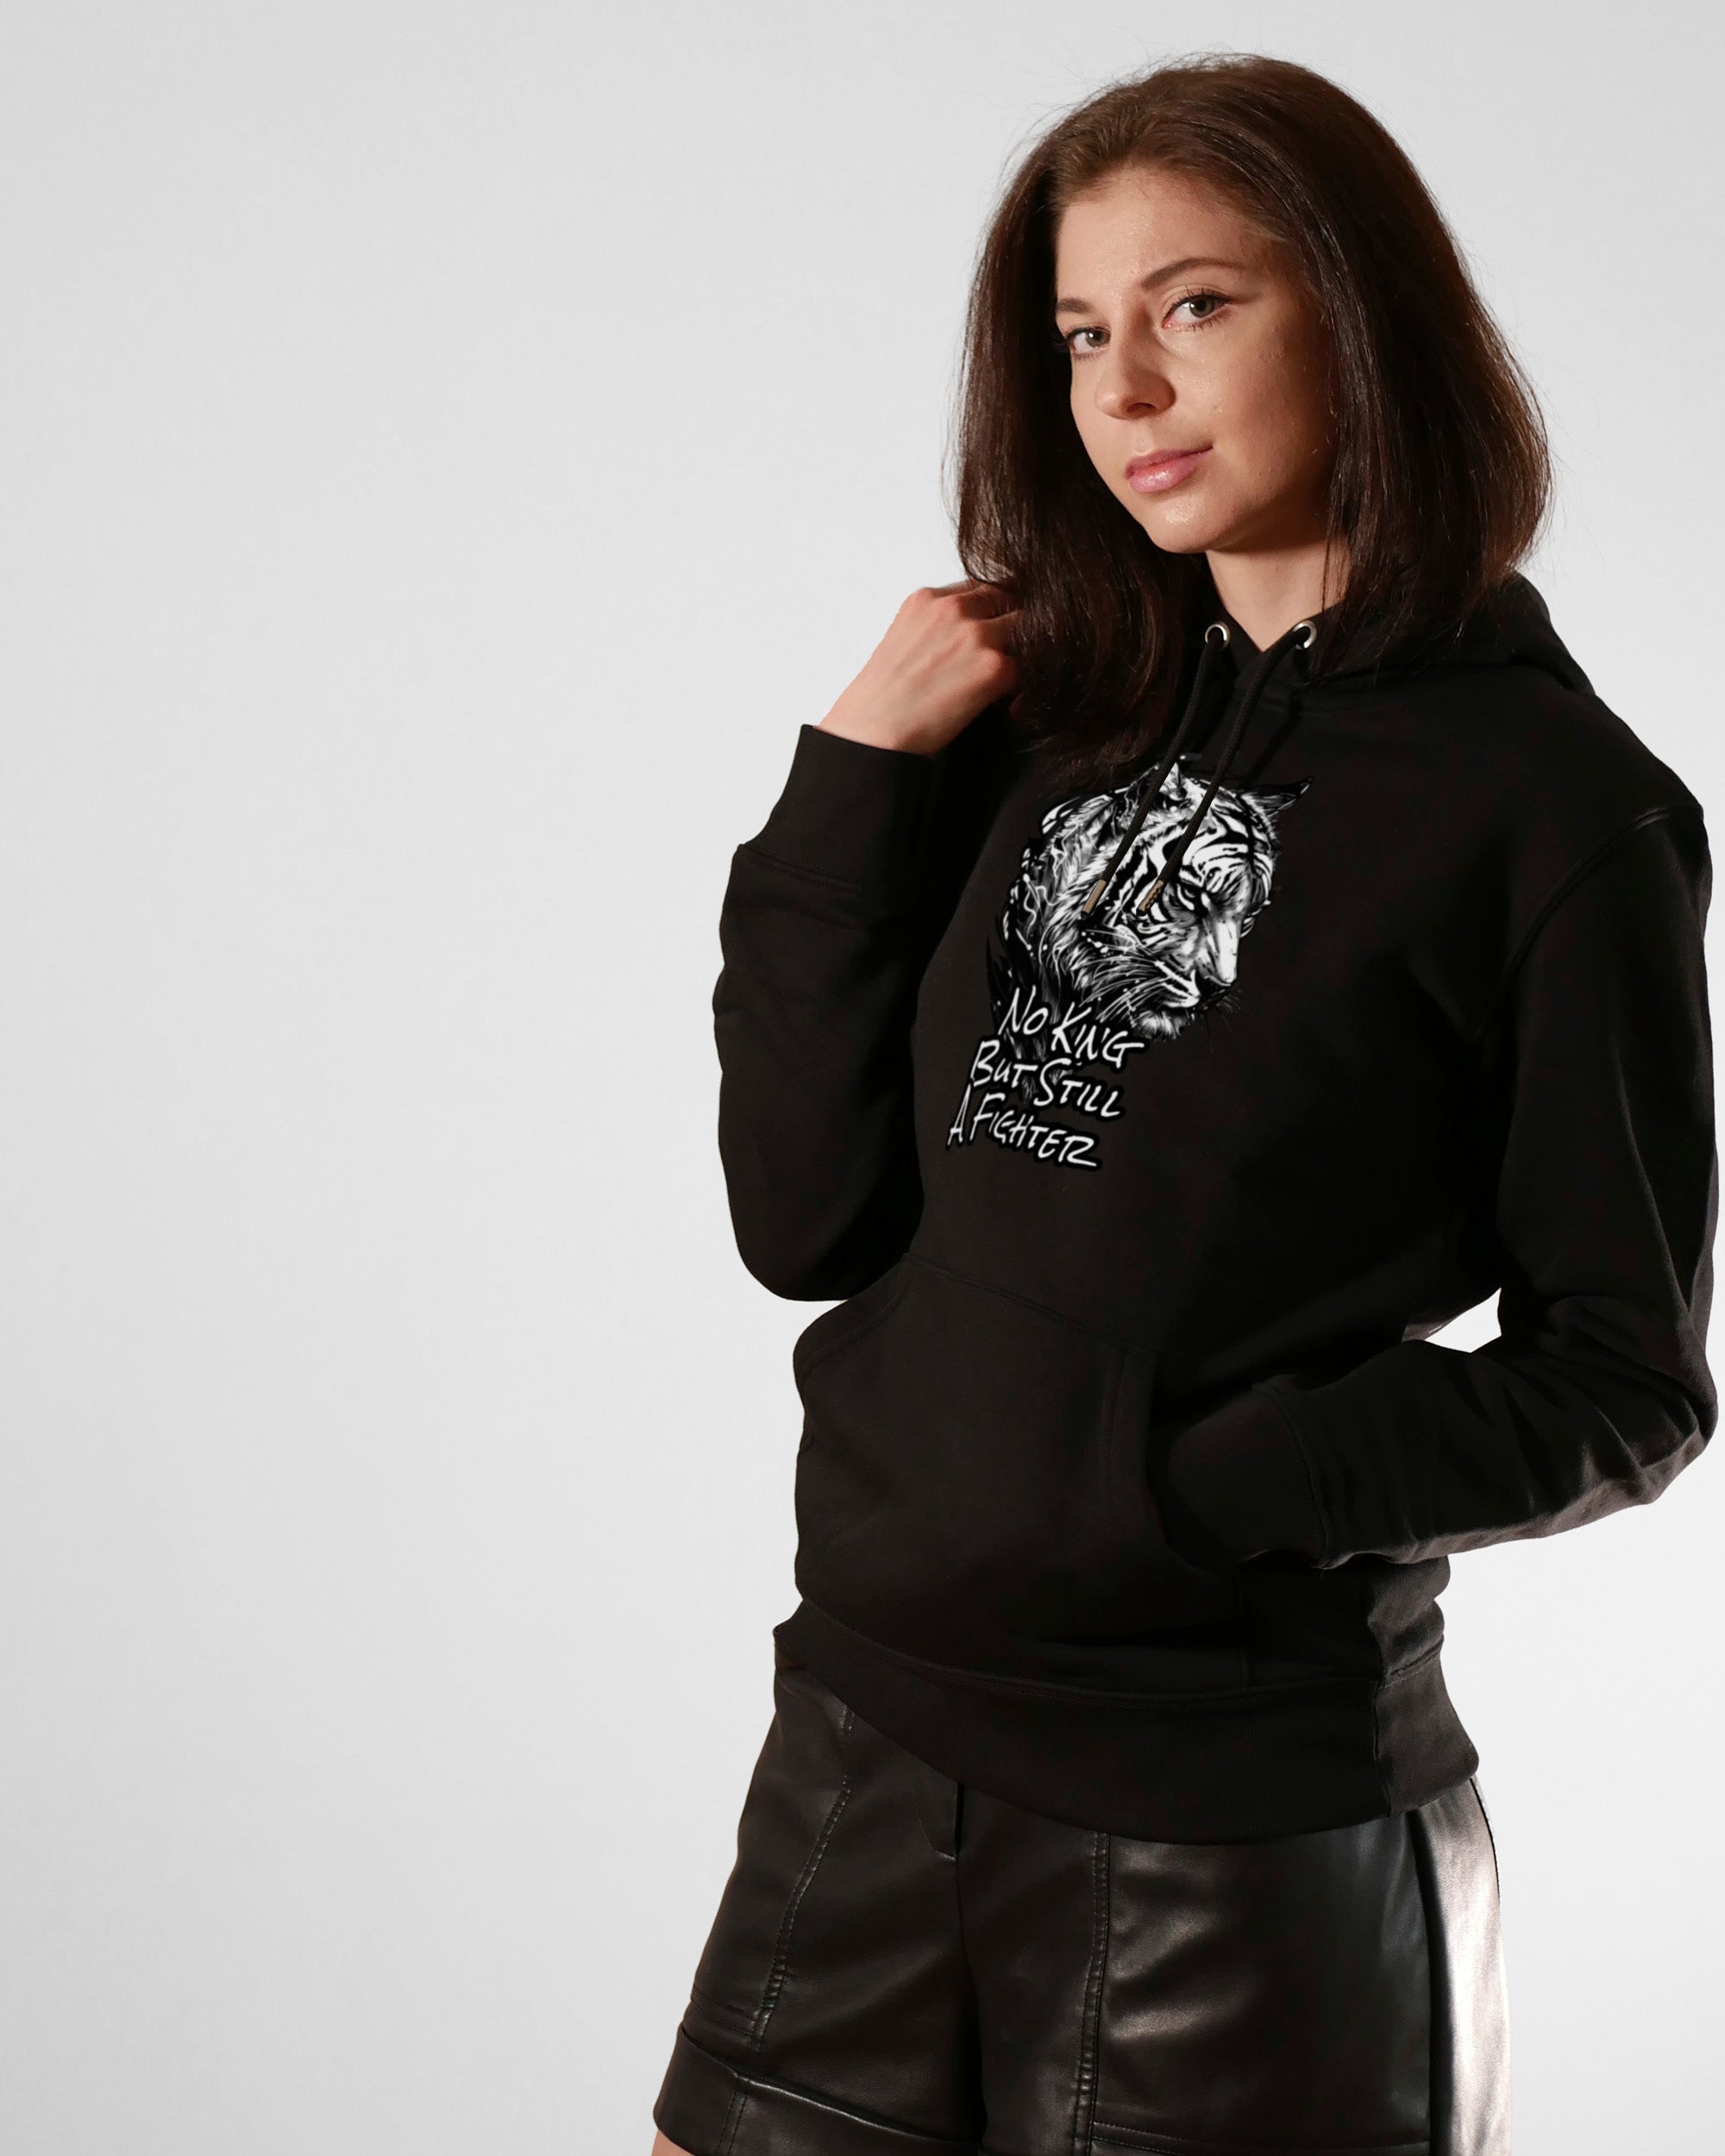 Tiger Fighter | 3-Style Hoodie